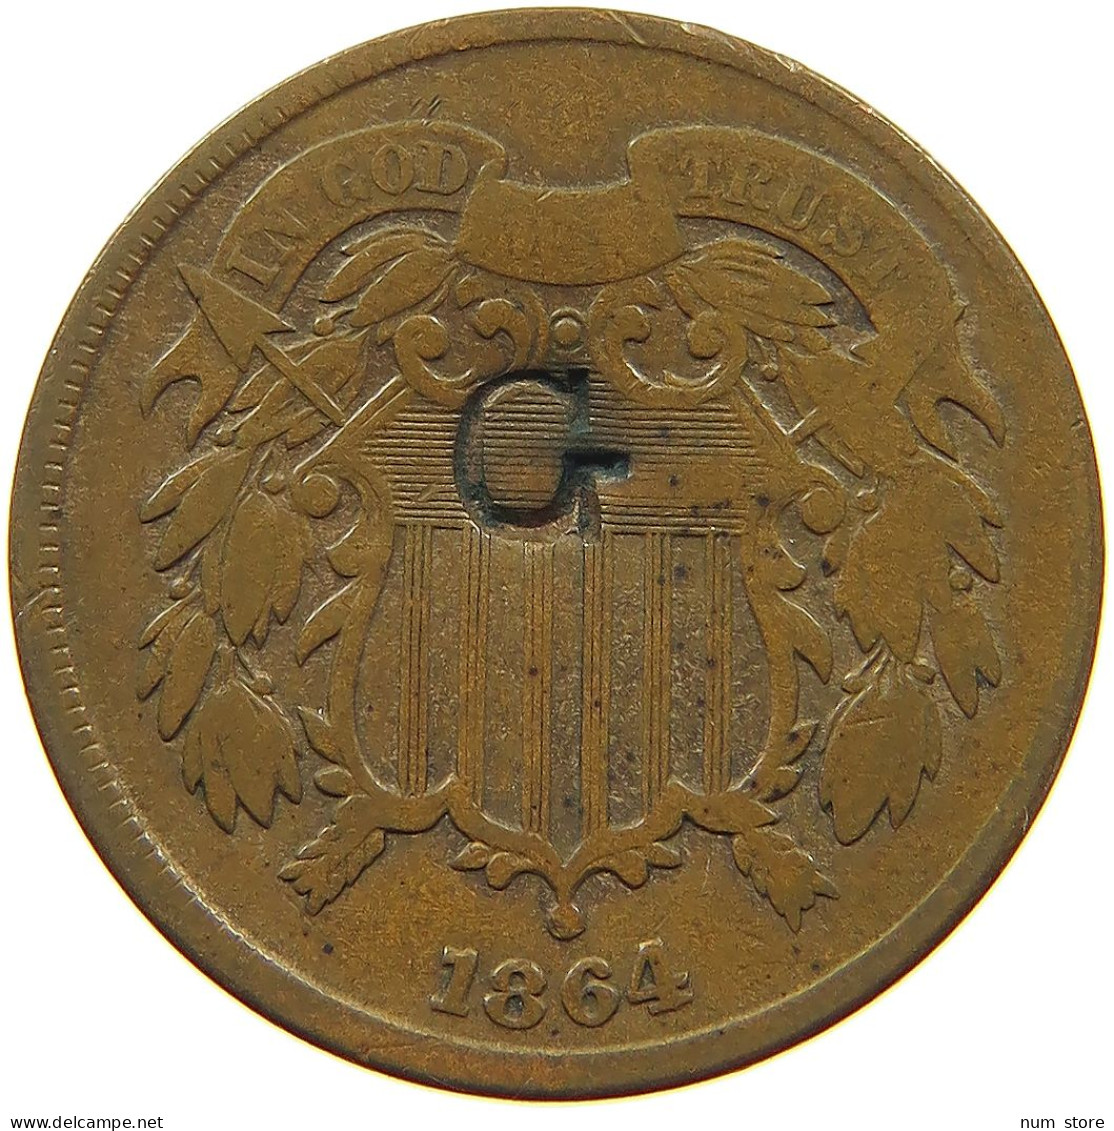 UNITED STATES OF AMERICA 2 CENTS 1864 COUNTERMARKED G #s076 0369 - 2, 3 & 20 Cent